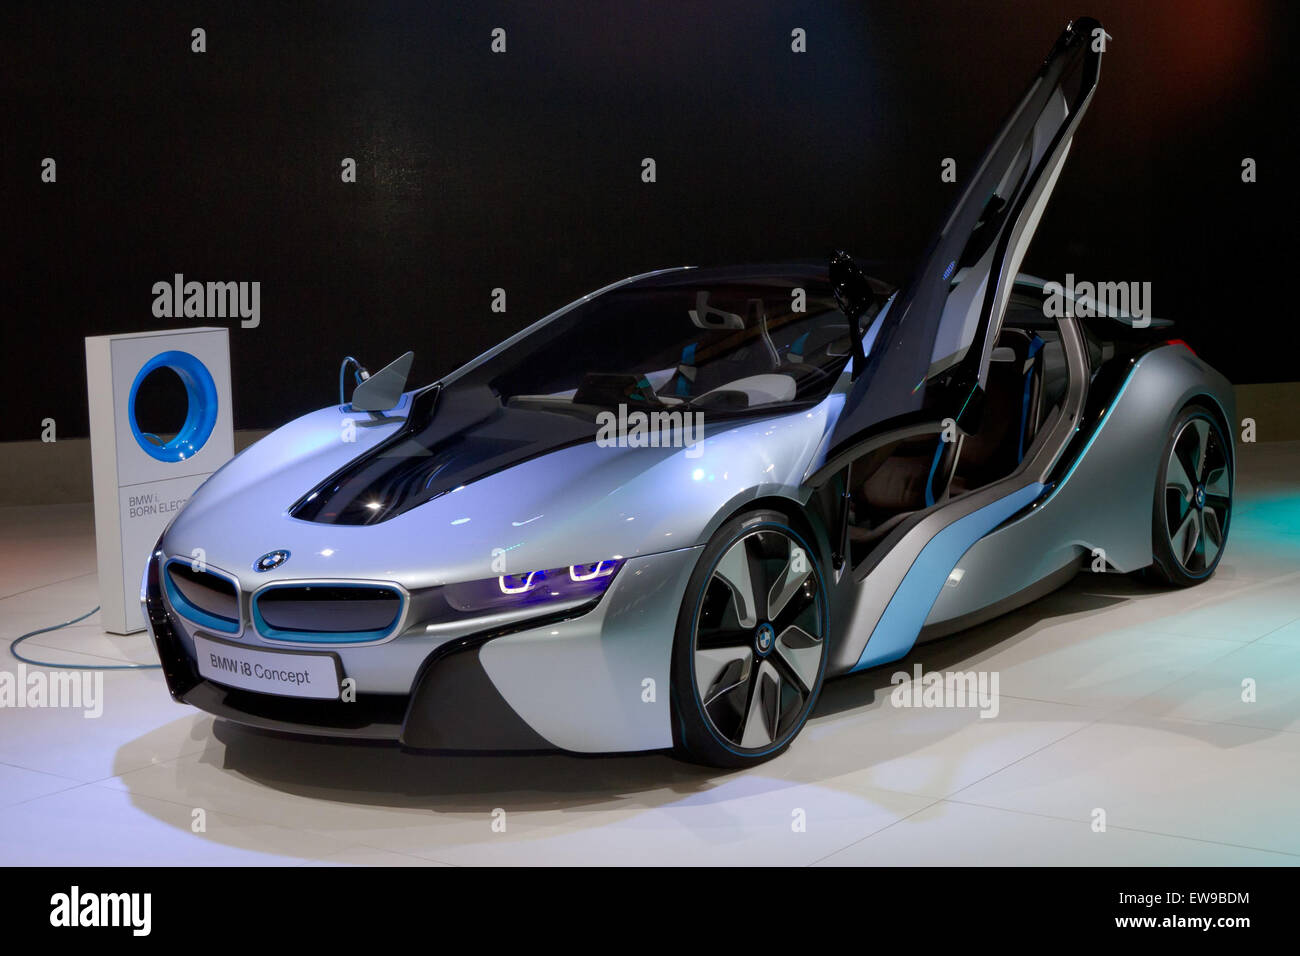 BMW i8 front 2011 Tokyo Motor Show Stock Photo